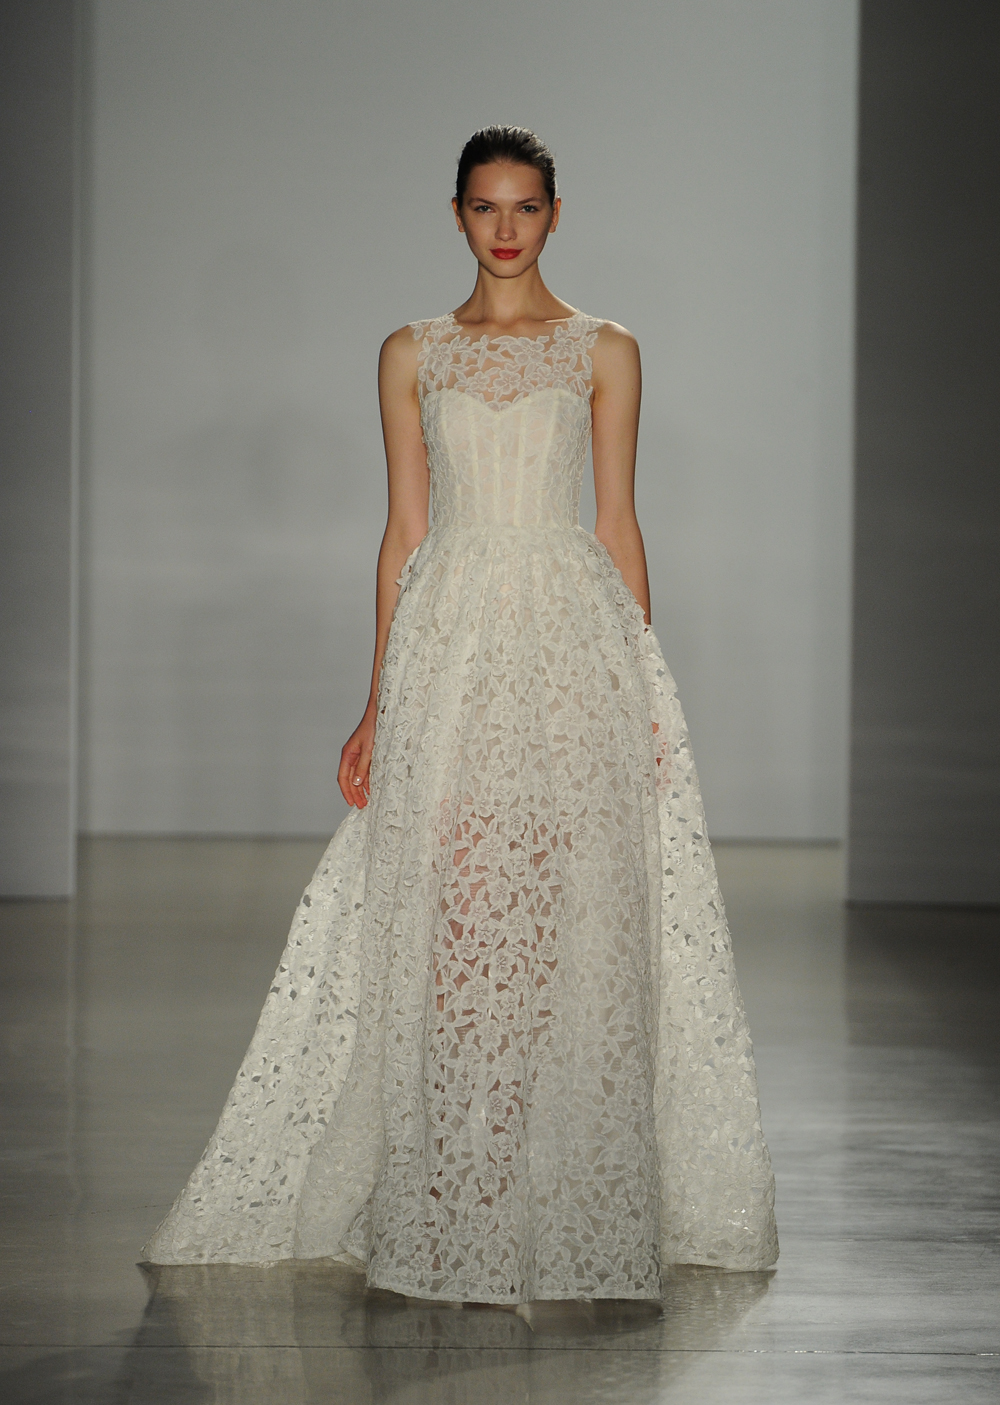 New Amsale Wedding Dresses For Fall 2016 Are Modern And Romantic | HuffPost